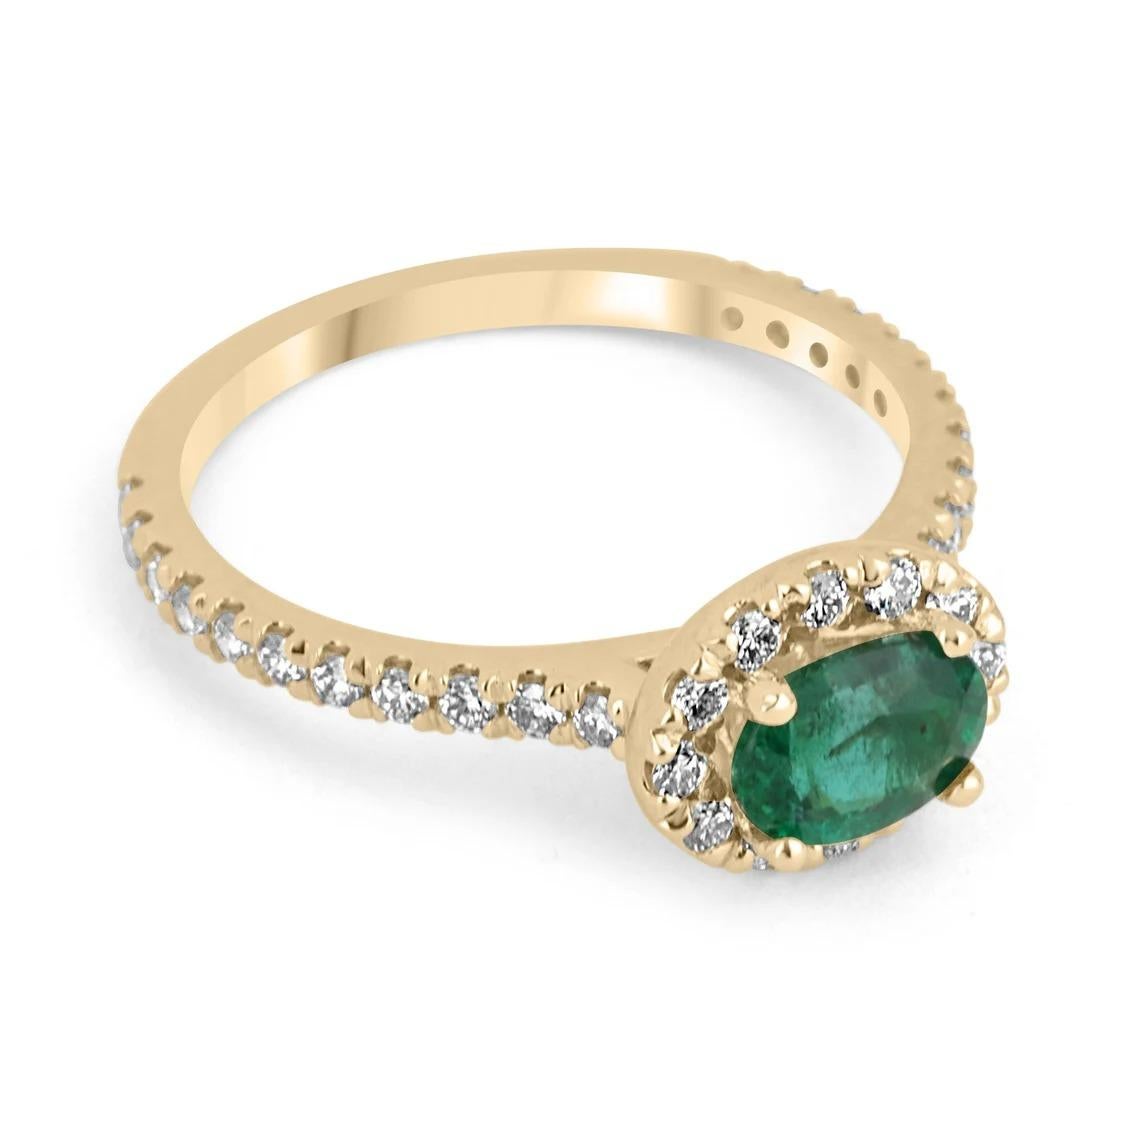 A stunning emerald & diamond ring. The center stone features a beautiful 1.15-carat, natural emerald cut in the shape of an oval. The gem stone has a desirable dark green color, with very good to excellent eye clarity. Set east to west; and